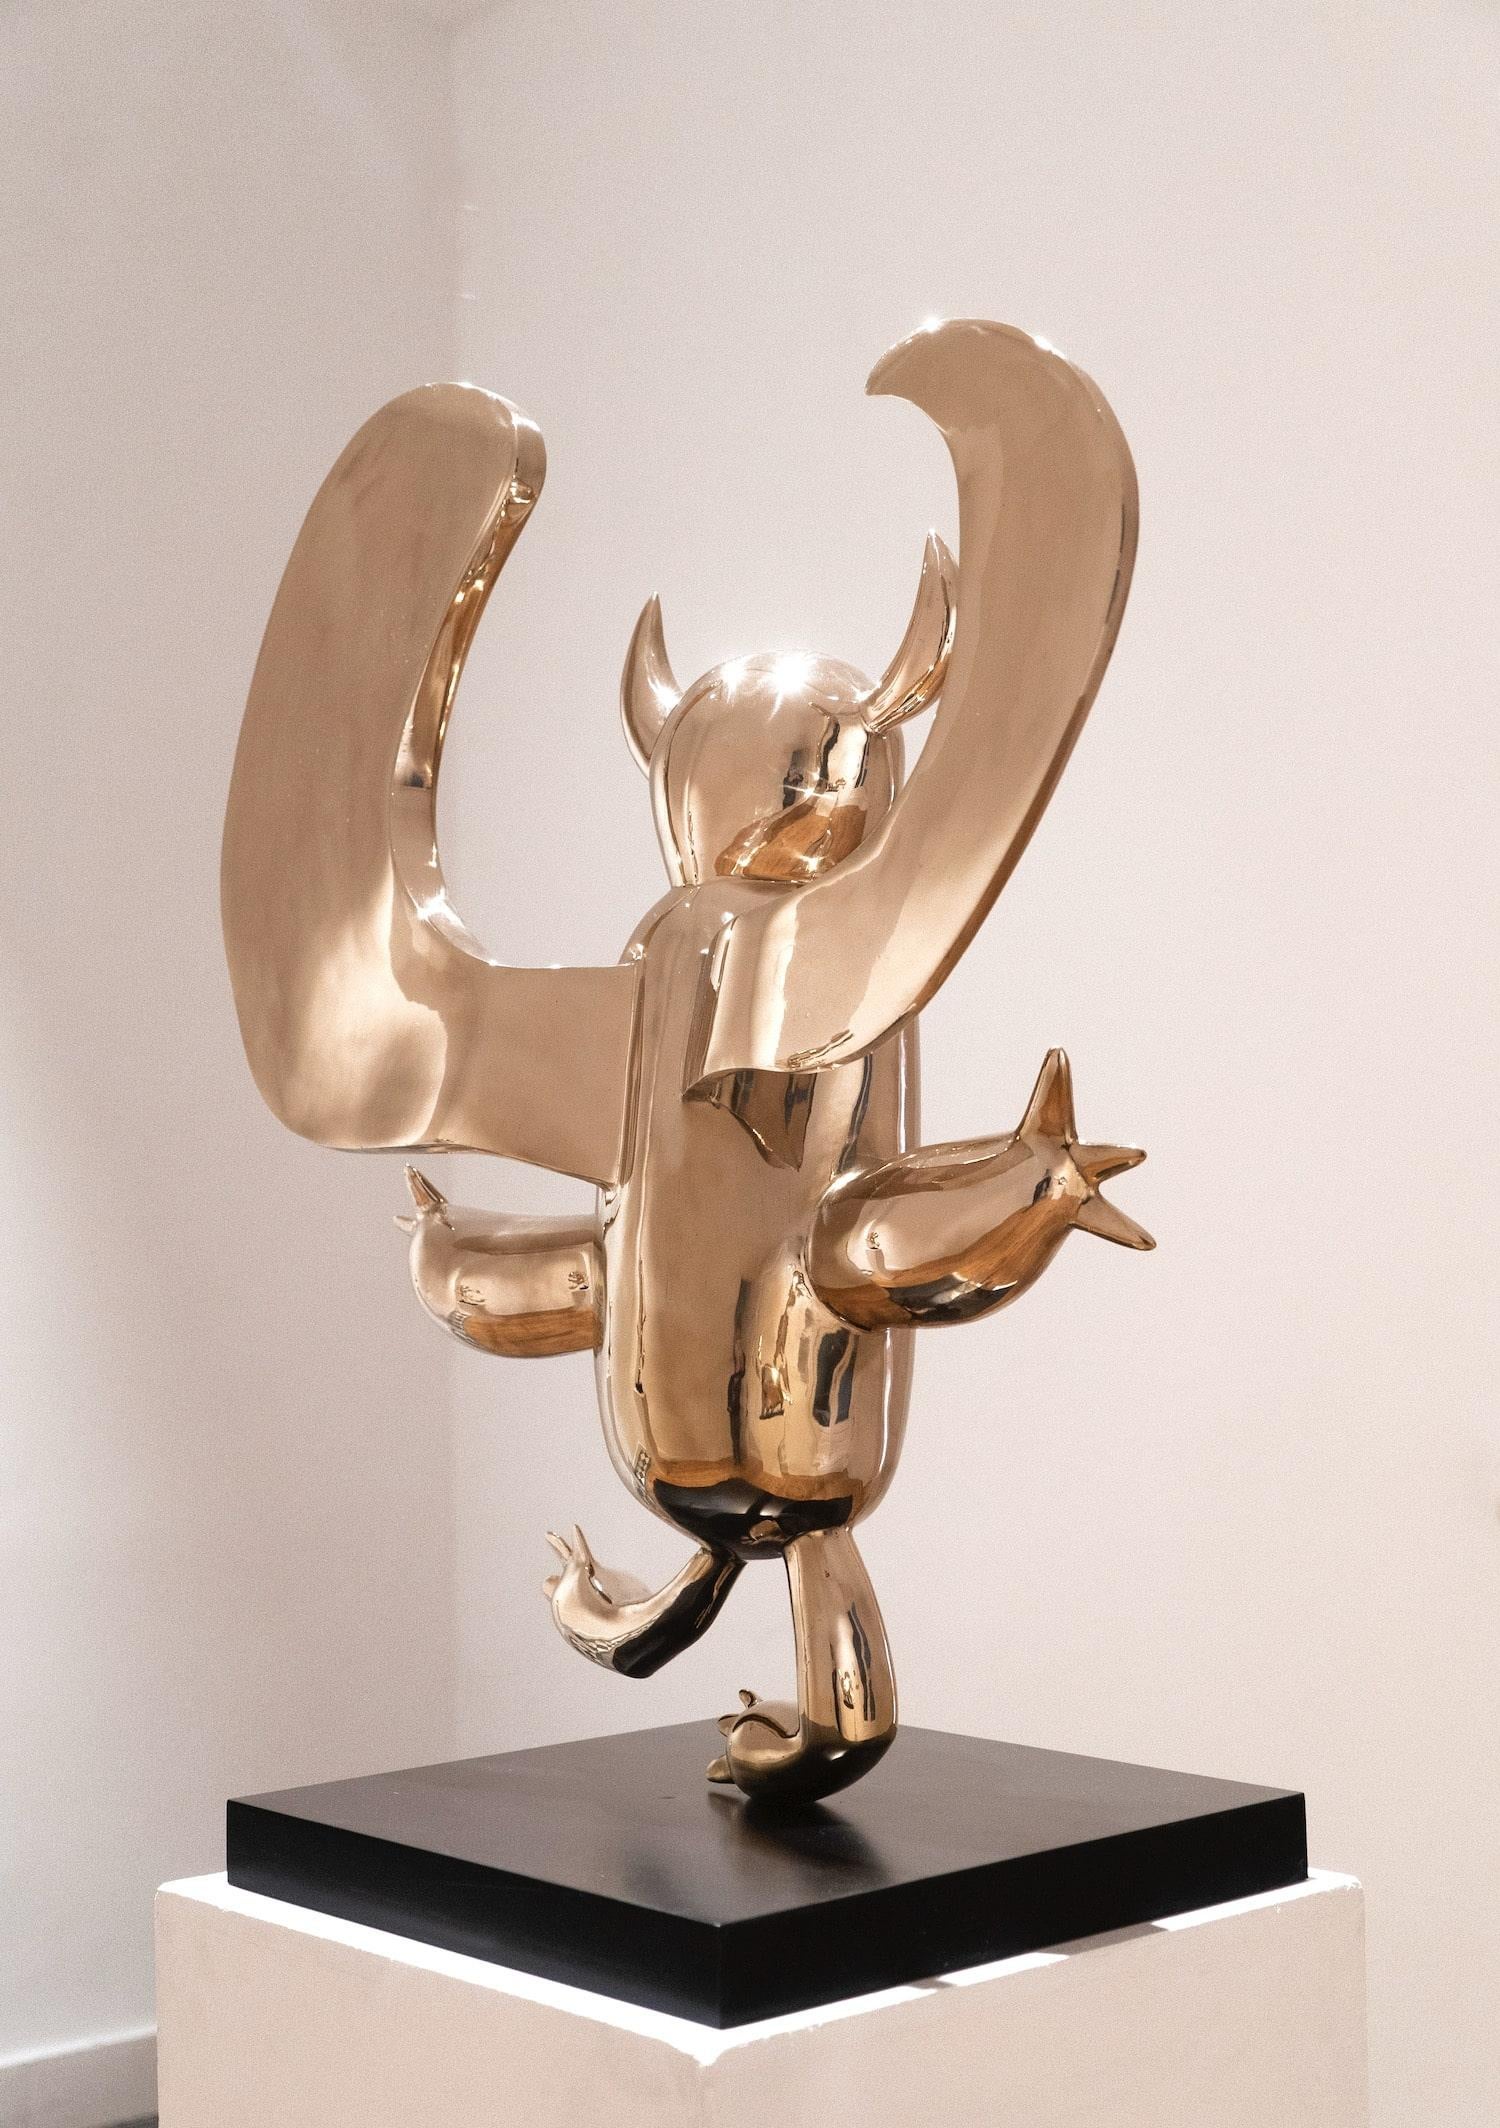 Winged Demon by Marcelo Martin Burgos - Polished bronze sculpture, golden For Sale 2